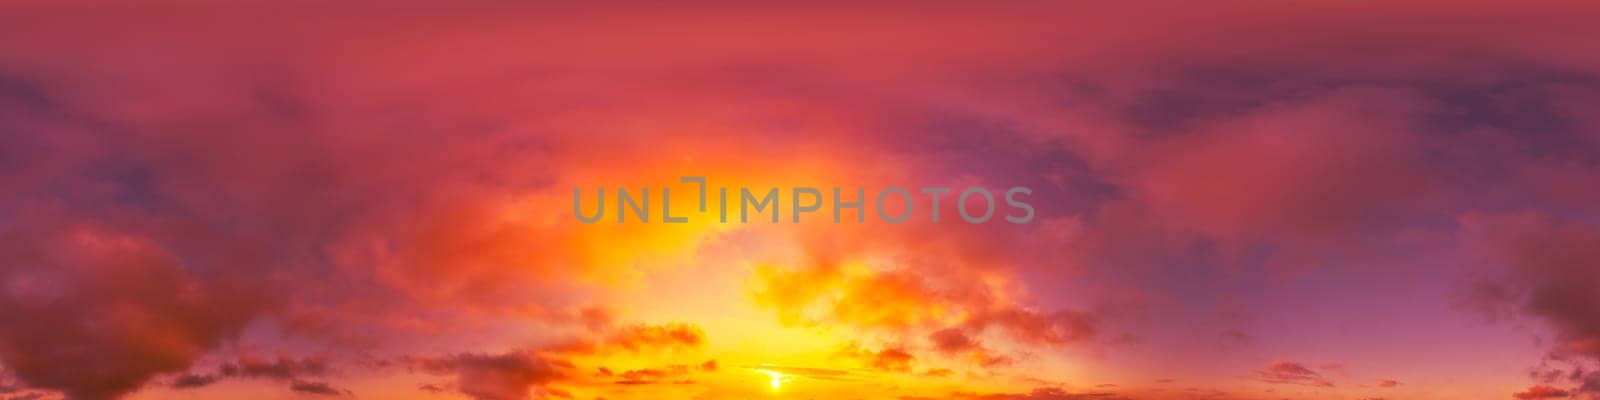 Blue evening sky seamless panorama spherical equirectangular 360 degree view with Cumulus clouds, setting sun. Full zenith for use in 3D graphics, game and aerial drone panoramas as sky replacement. by Matiunina